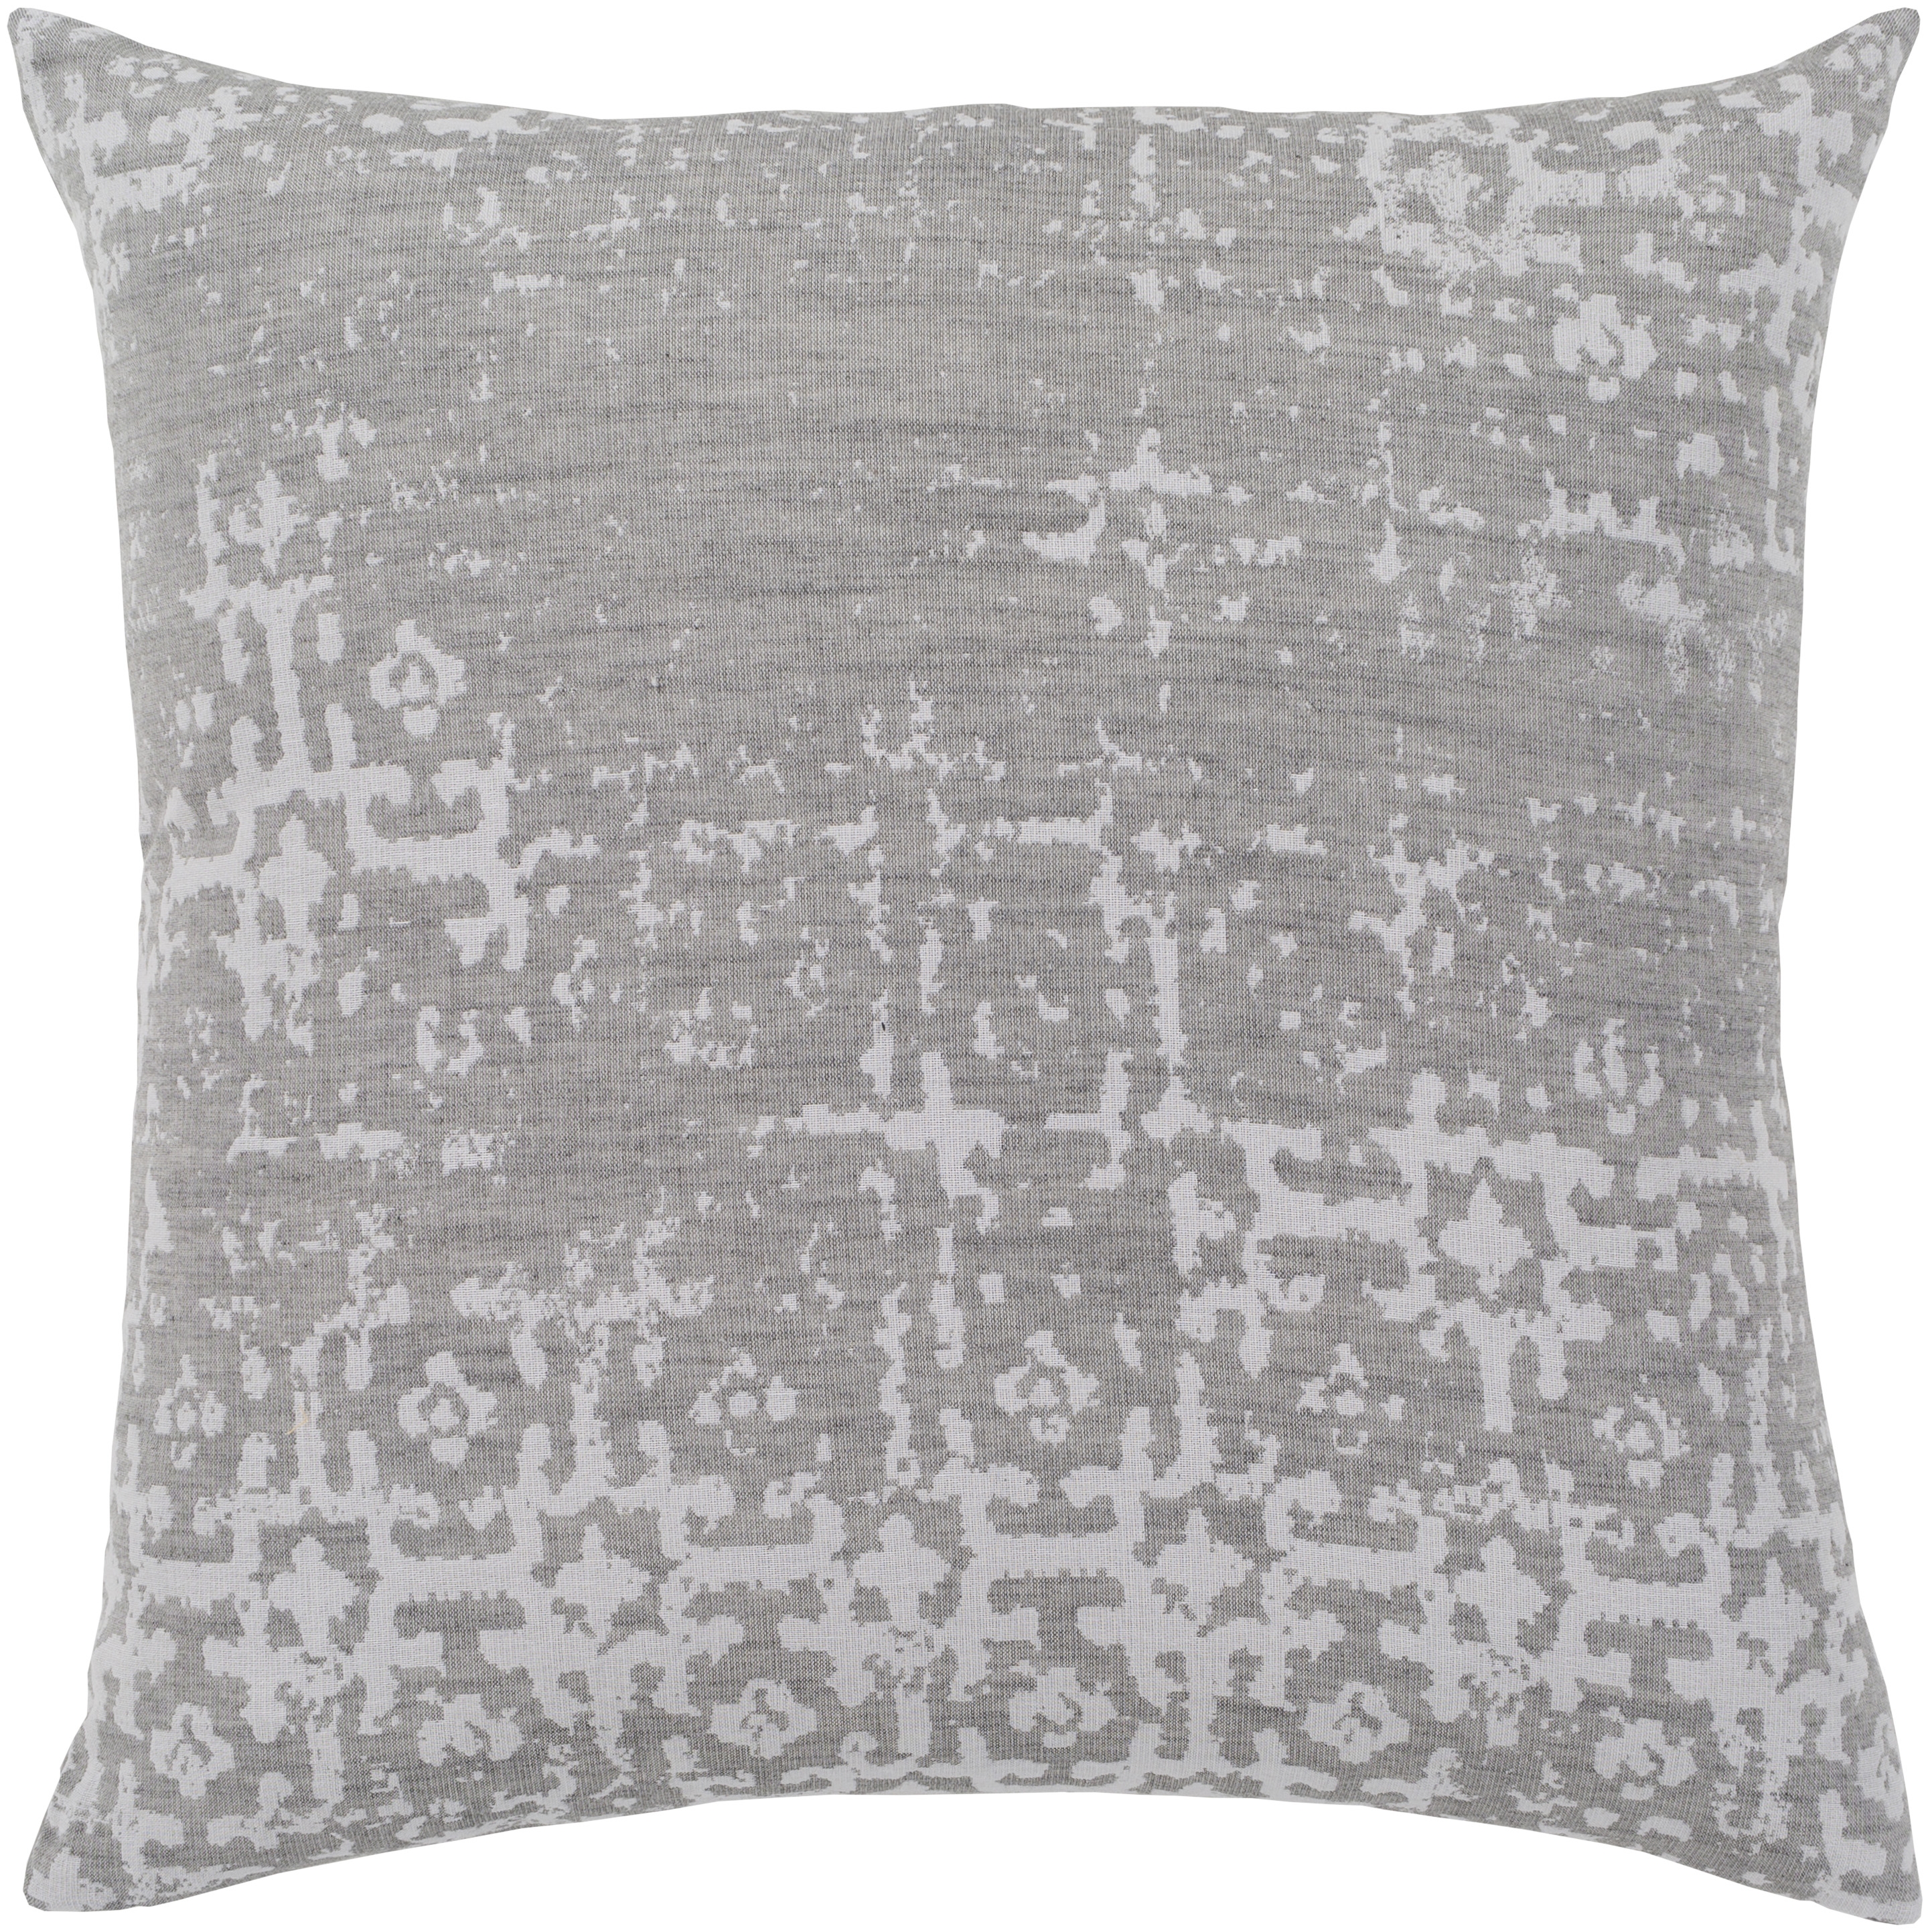 Abstraction Throw Pillow, 20" x 20", with poly insert - Image 0